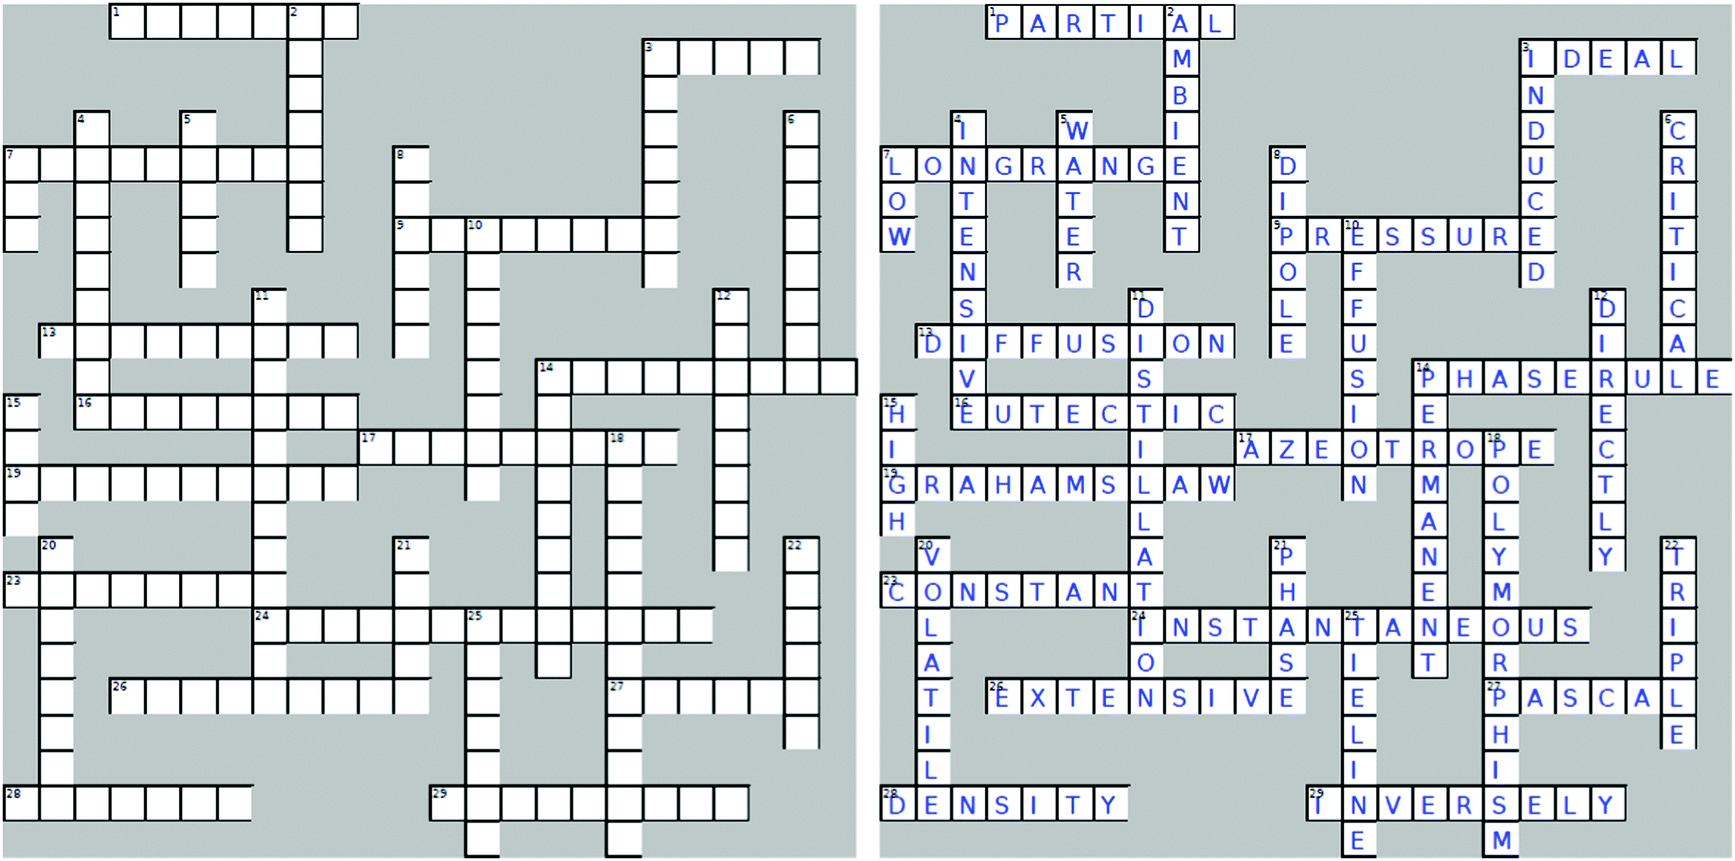 Acrostic Puzzles - Play Online or Print Your Own for Free!